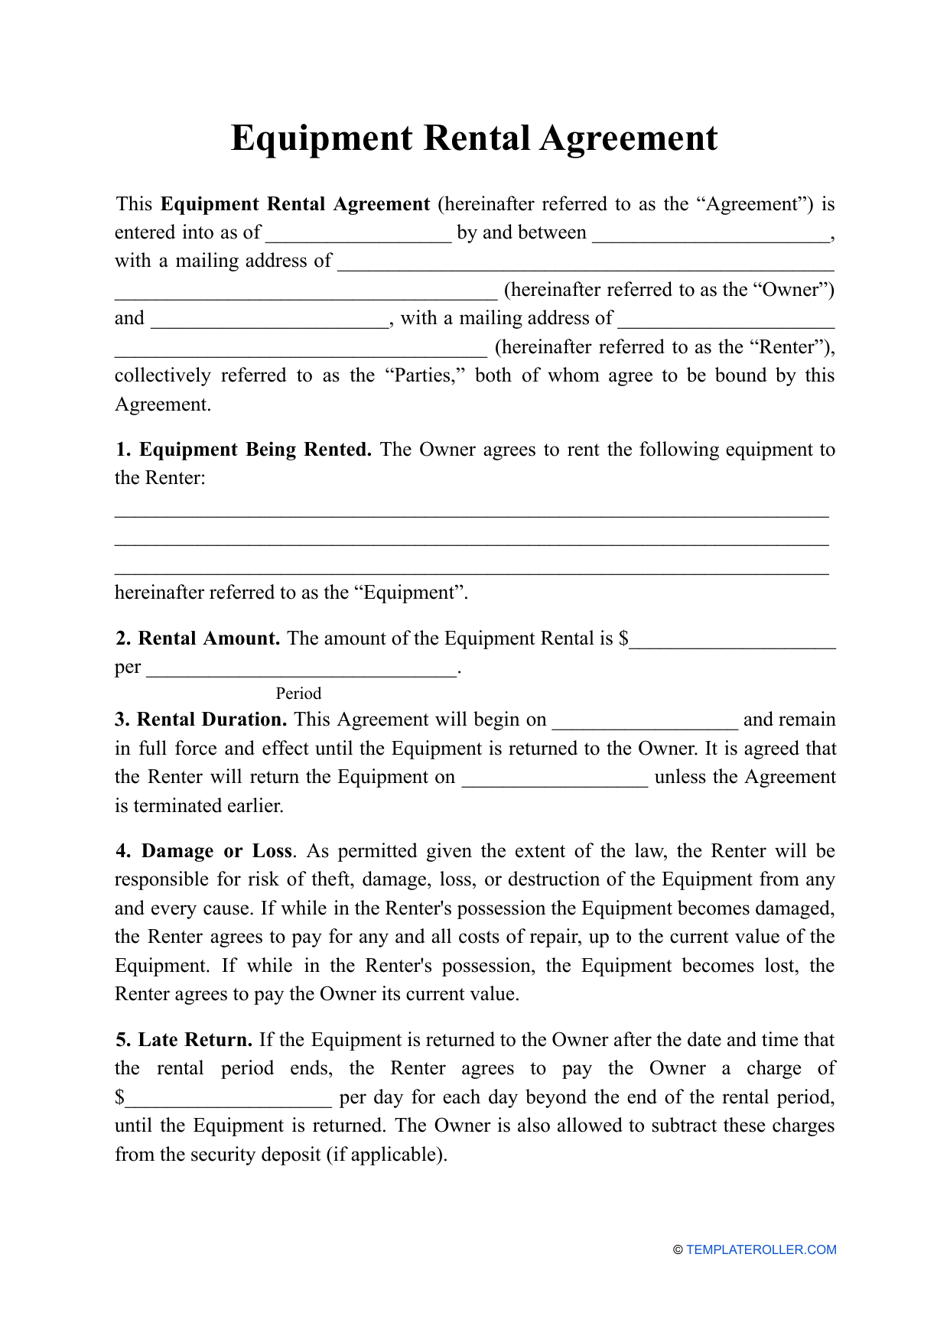 Equipment Rental Agreement Template Download Printable PDF Throughout tool rental agreement template